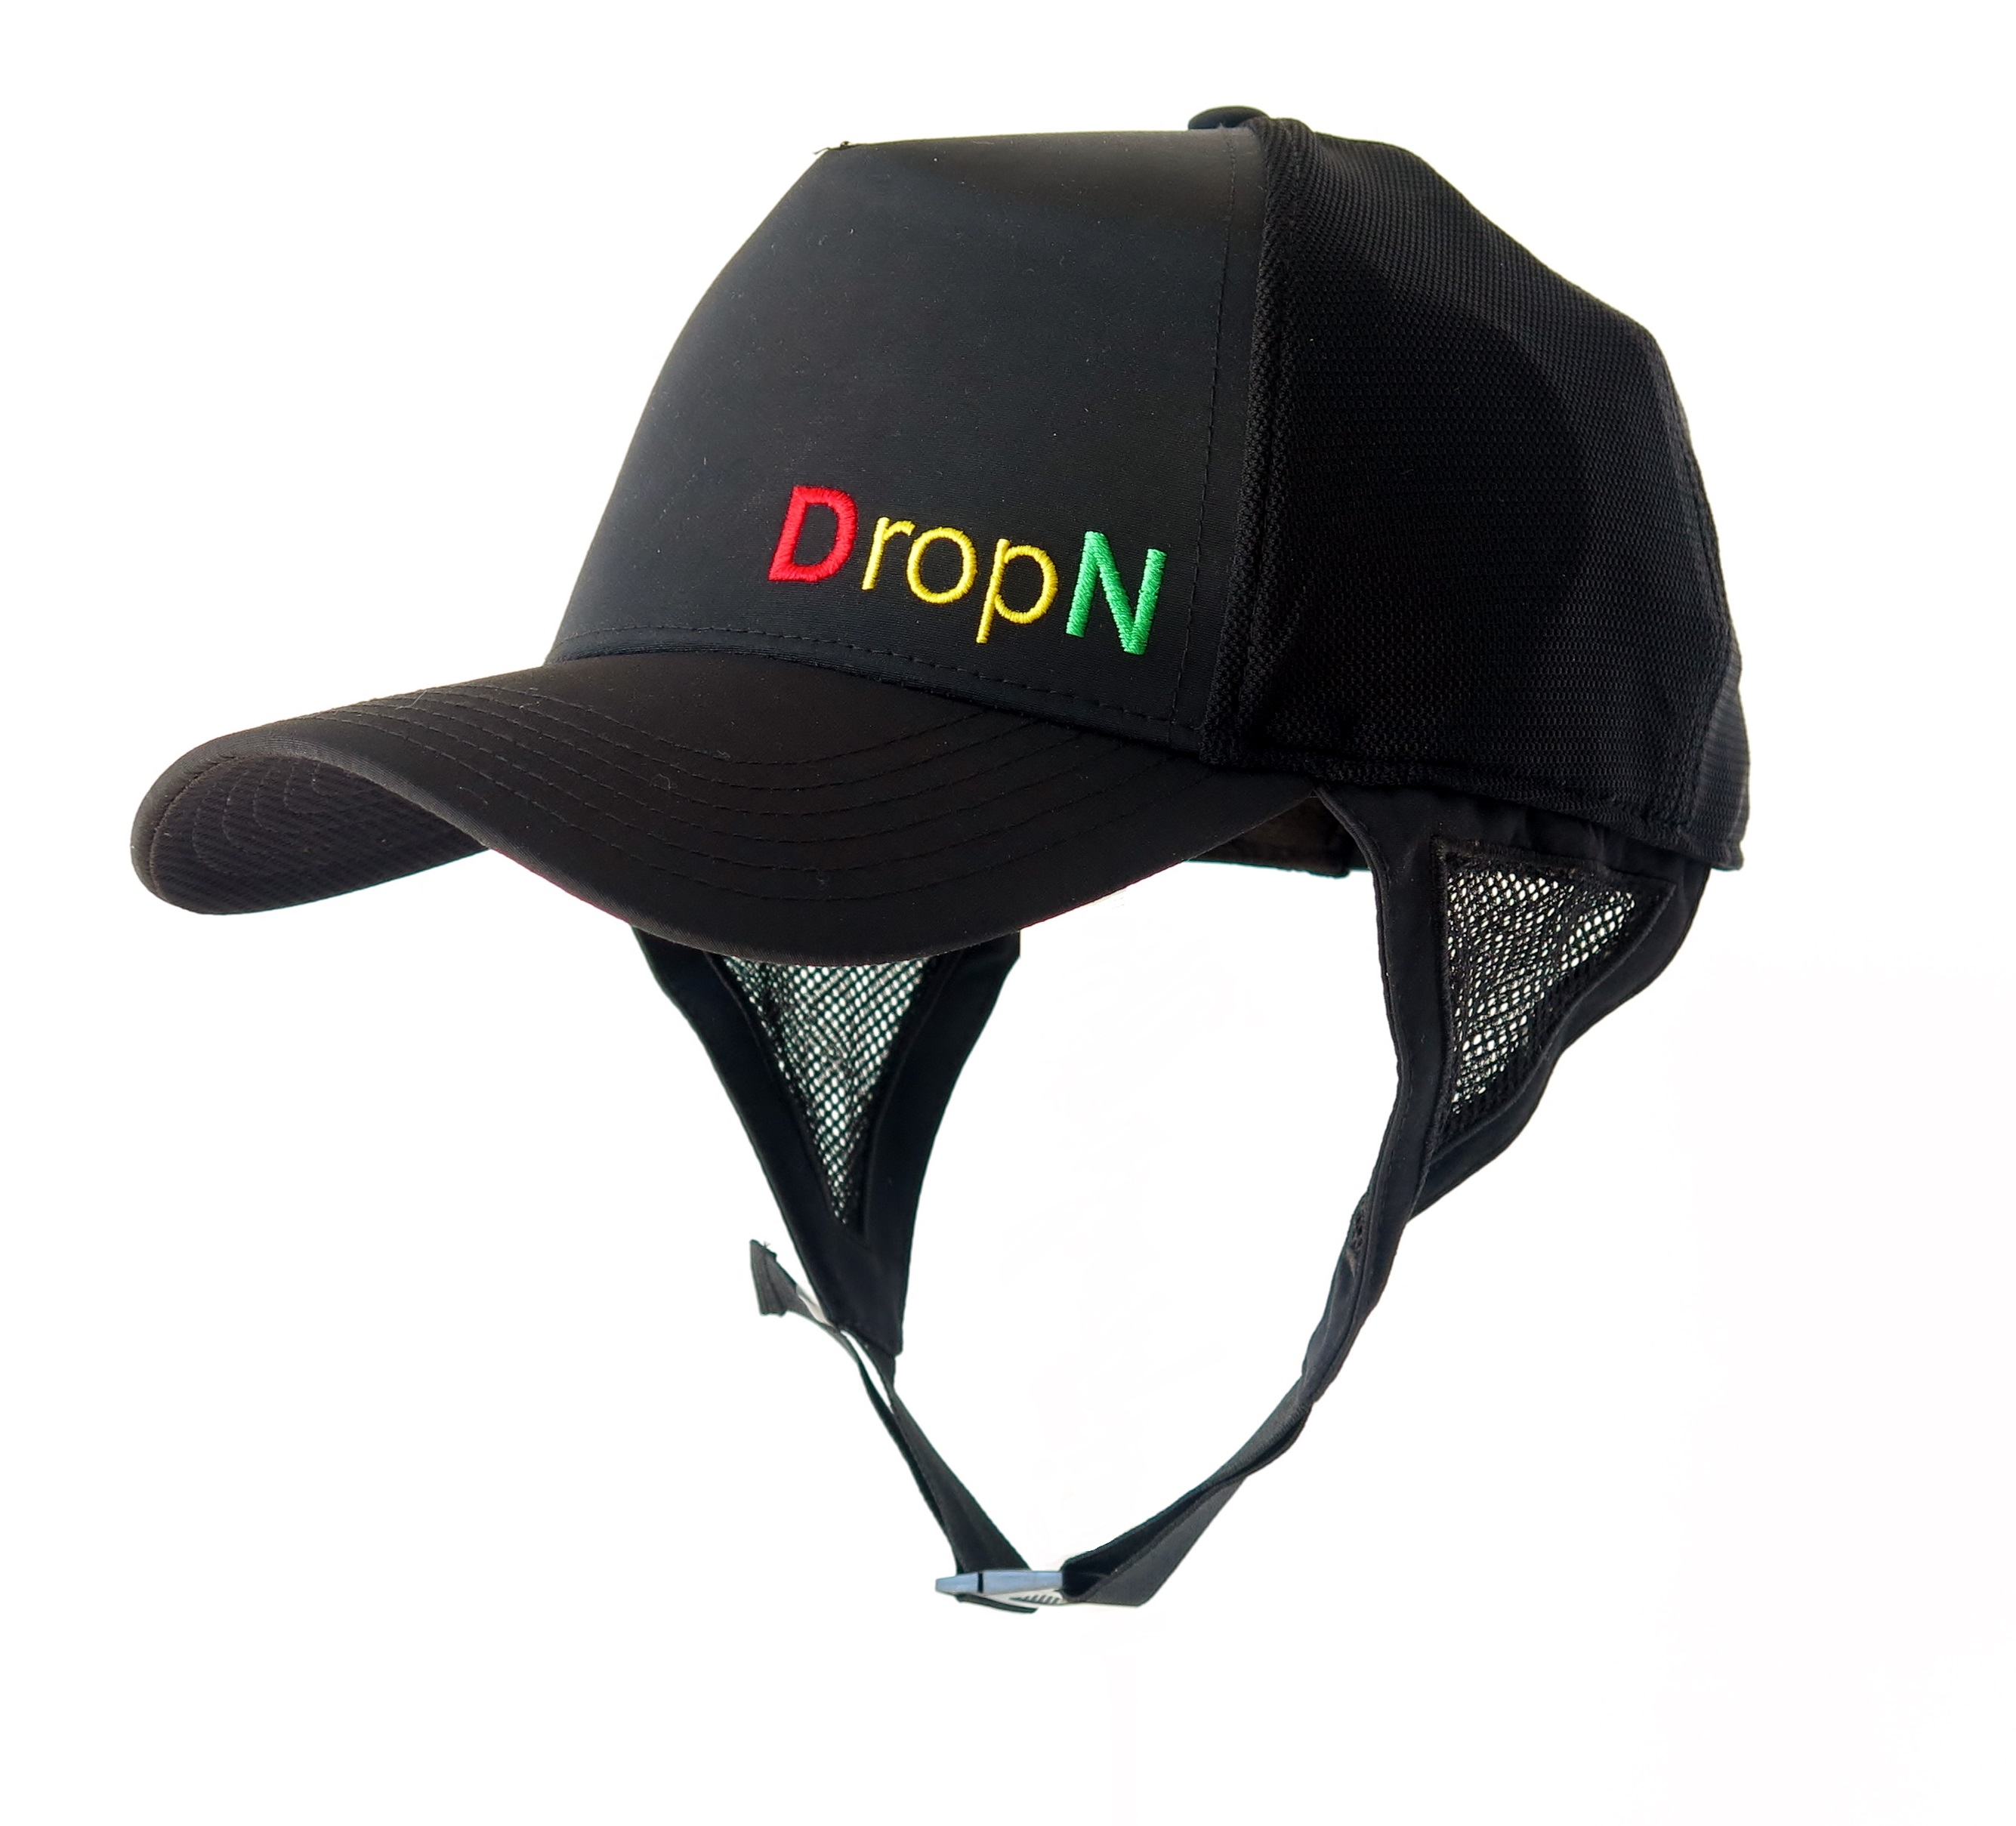 DropN - Surf - Surf Chin Gear DropN™ and Logo Strap Apparel Hat - Rasta Surf with